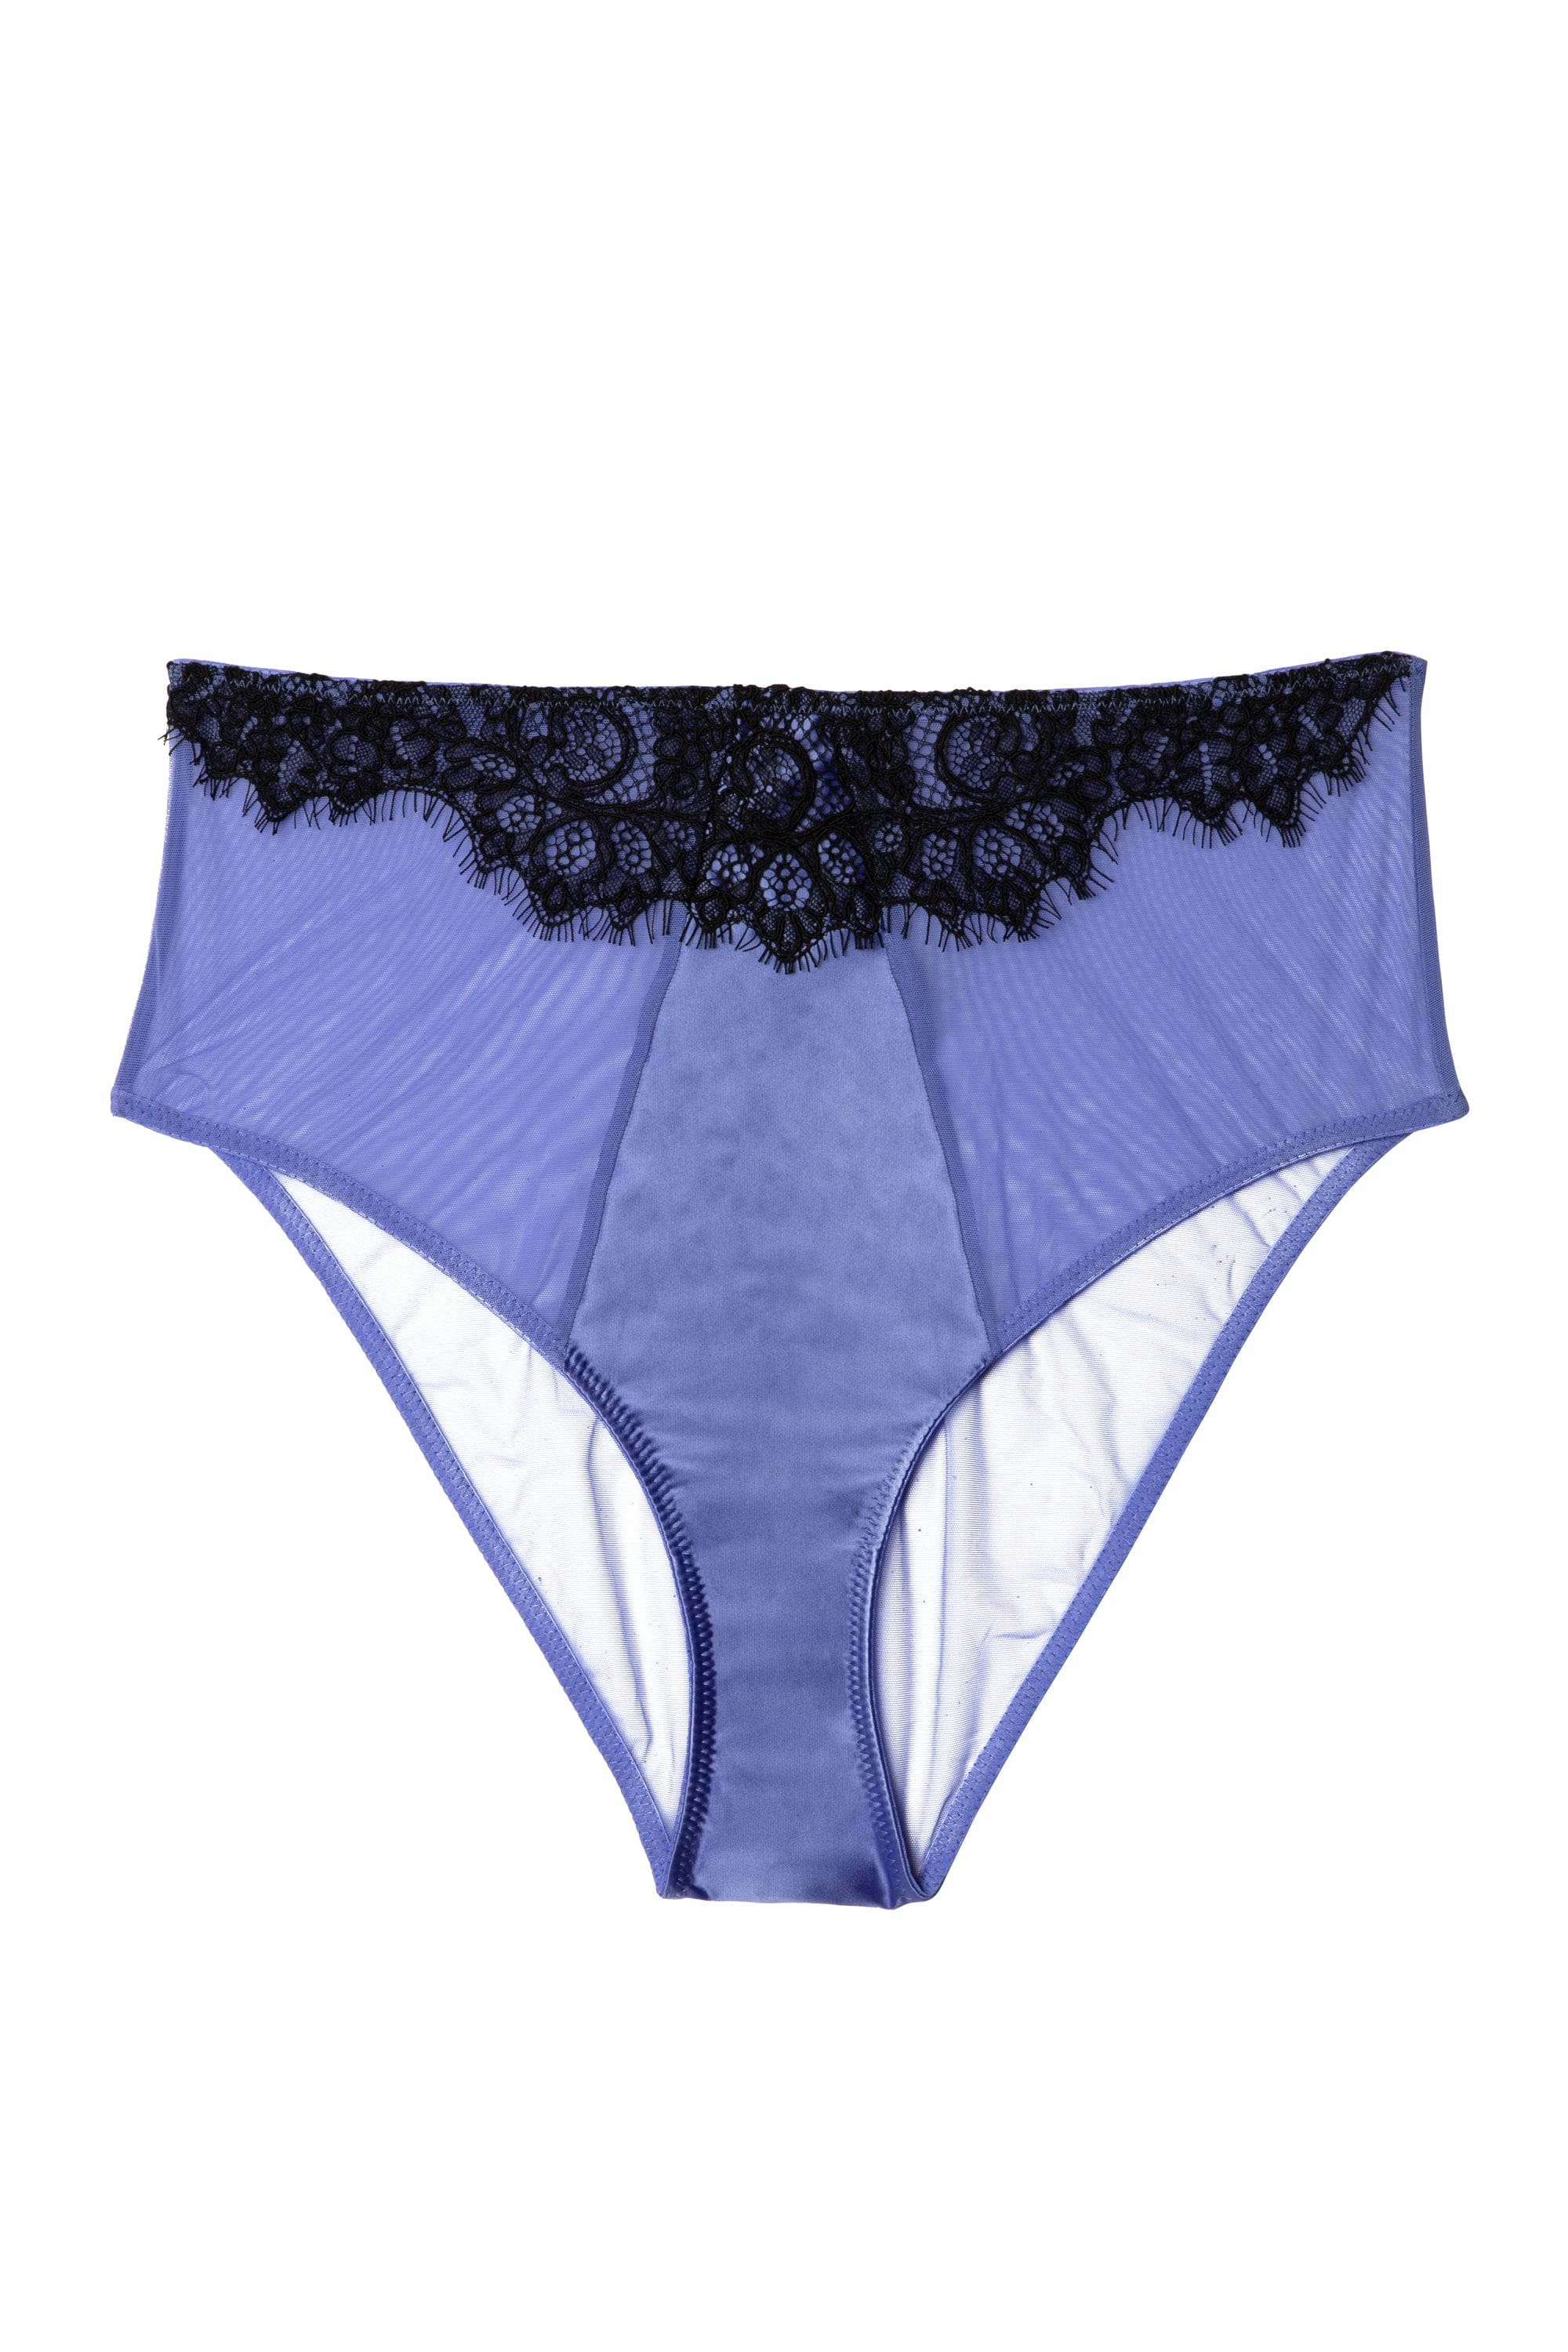 ONLY 3 Pack Lilac and Black Lace Briefs